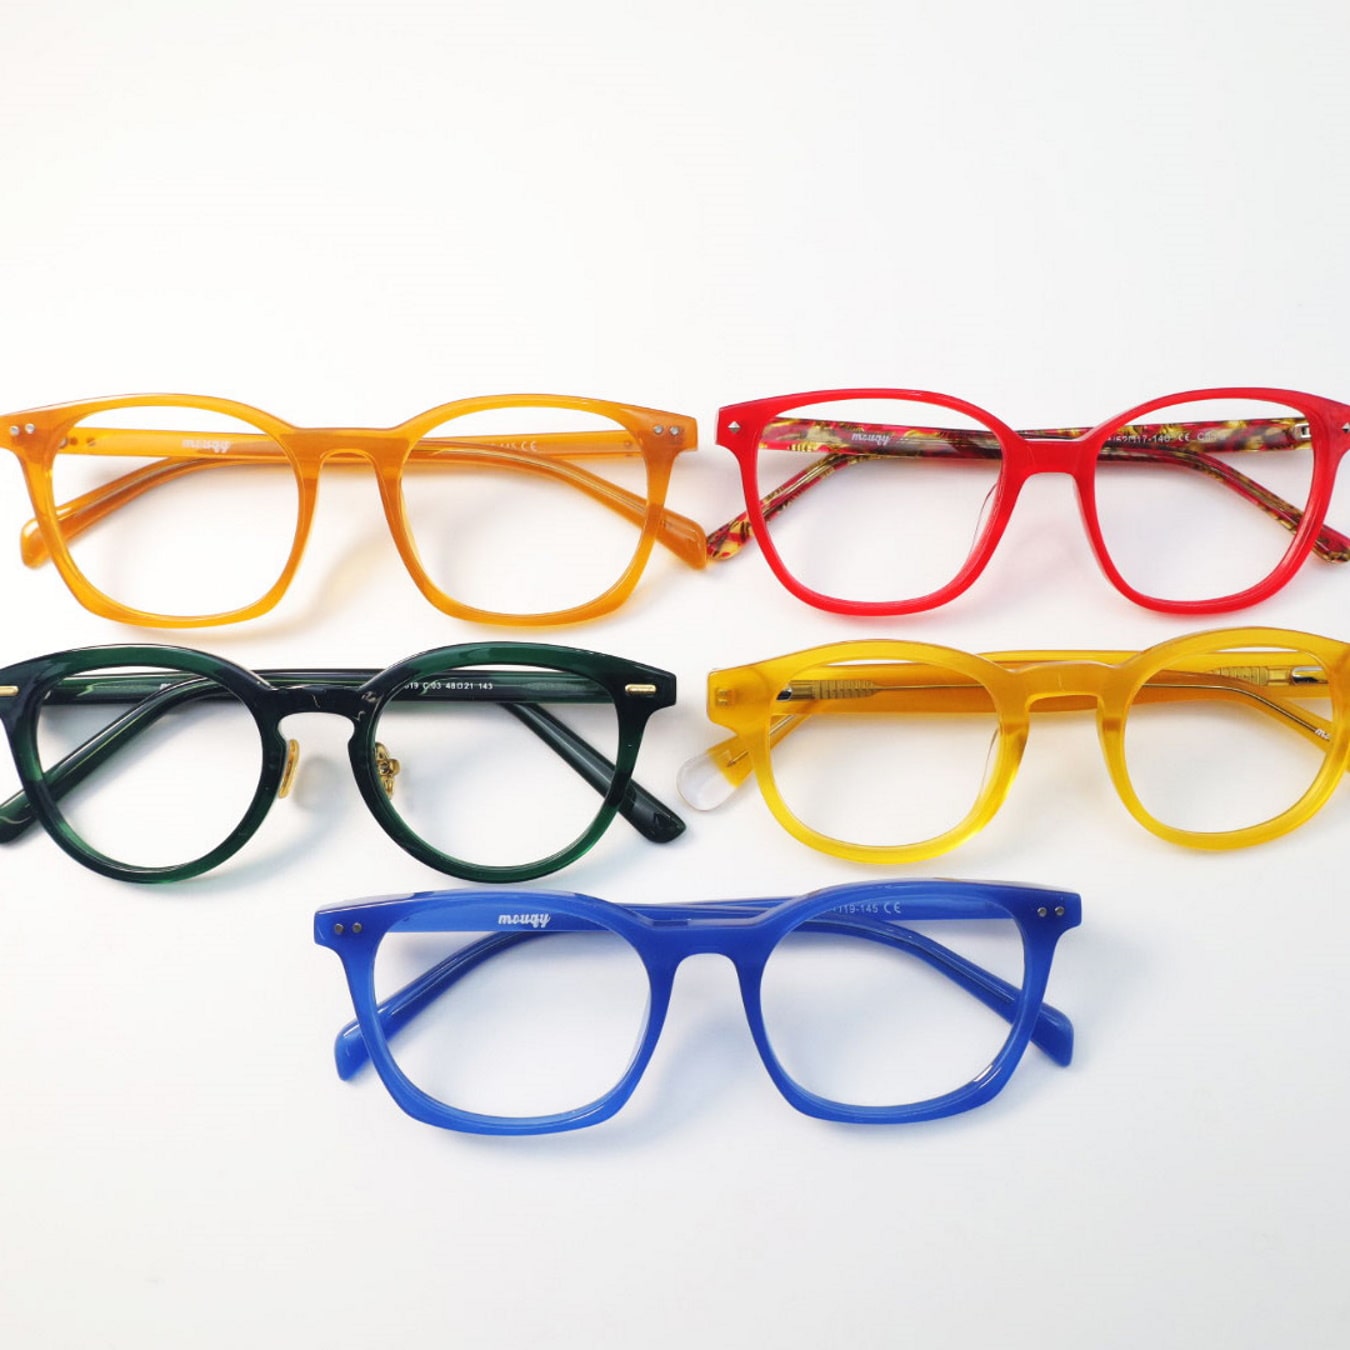 5 pairs of glasses frames in color orange red green yellow blue